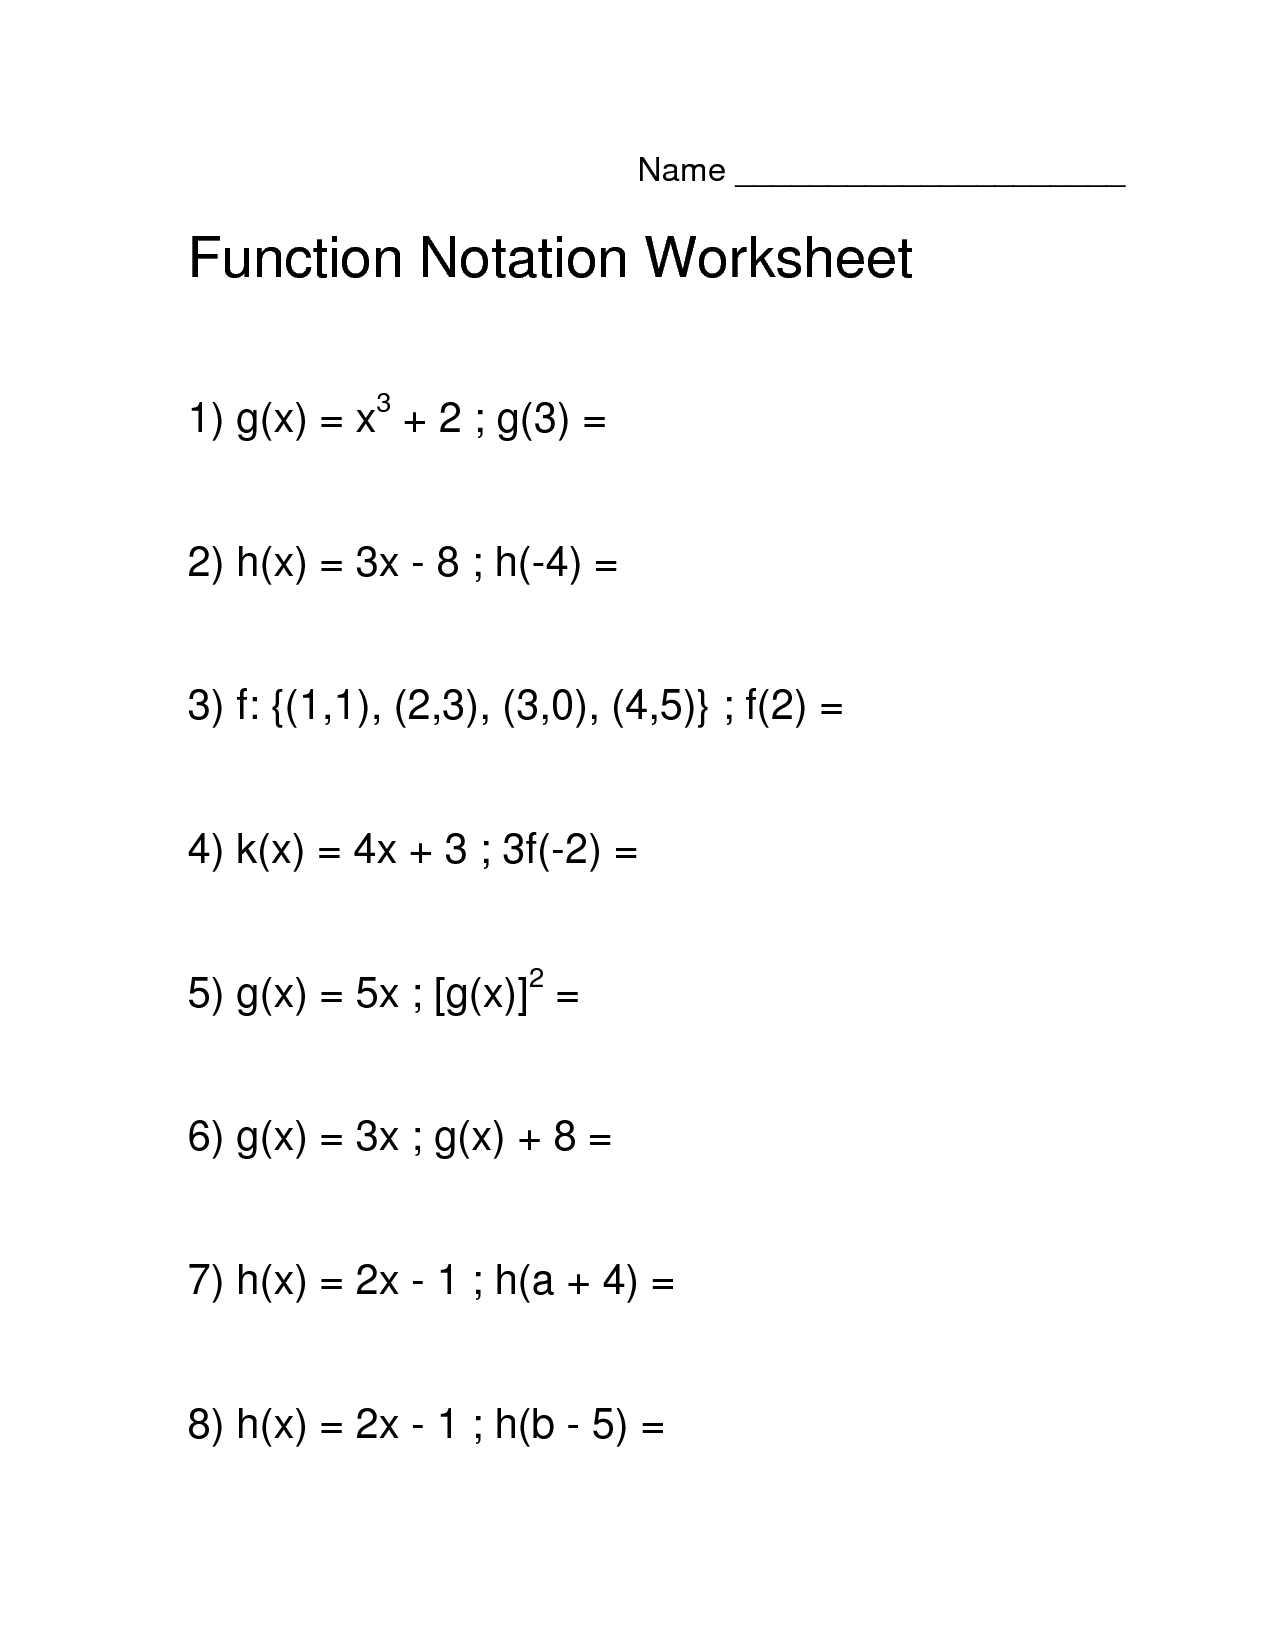 12-best-images-of-function-notation-algebra-worksheets-function-notation-algebra-1-worksheet